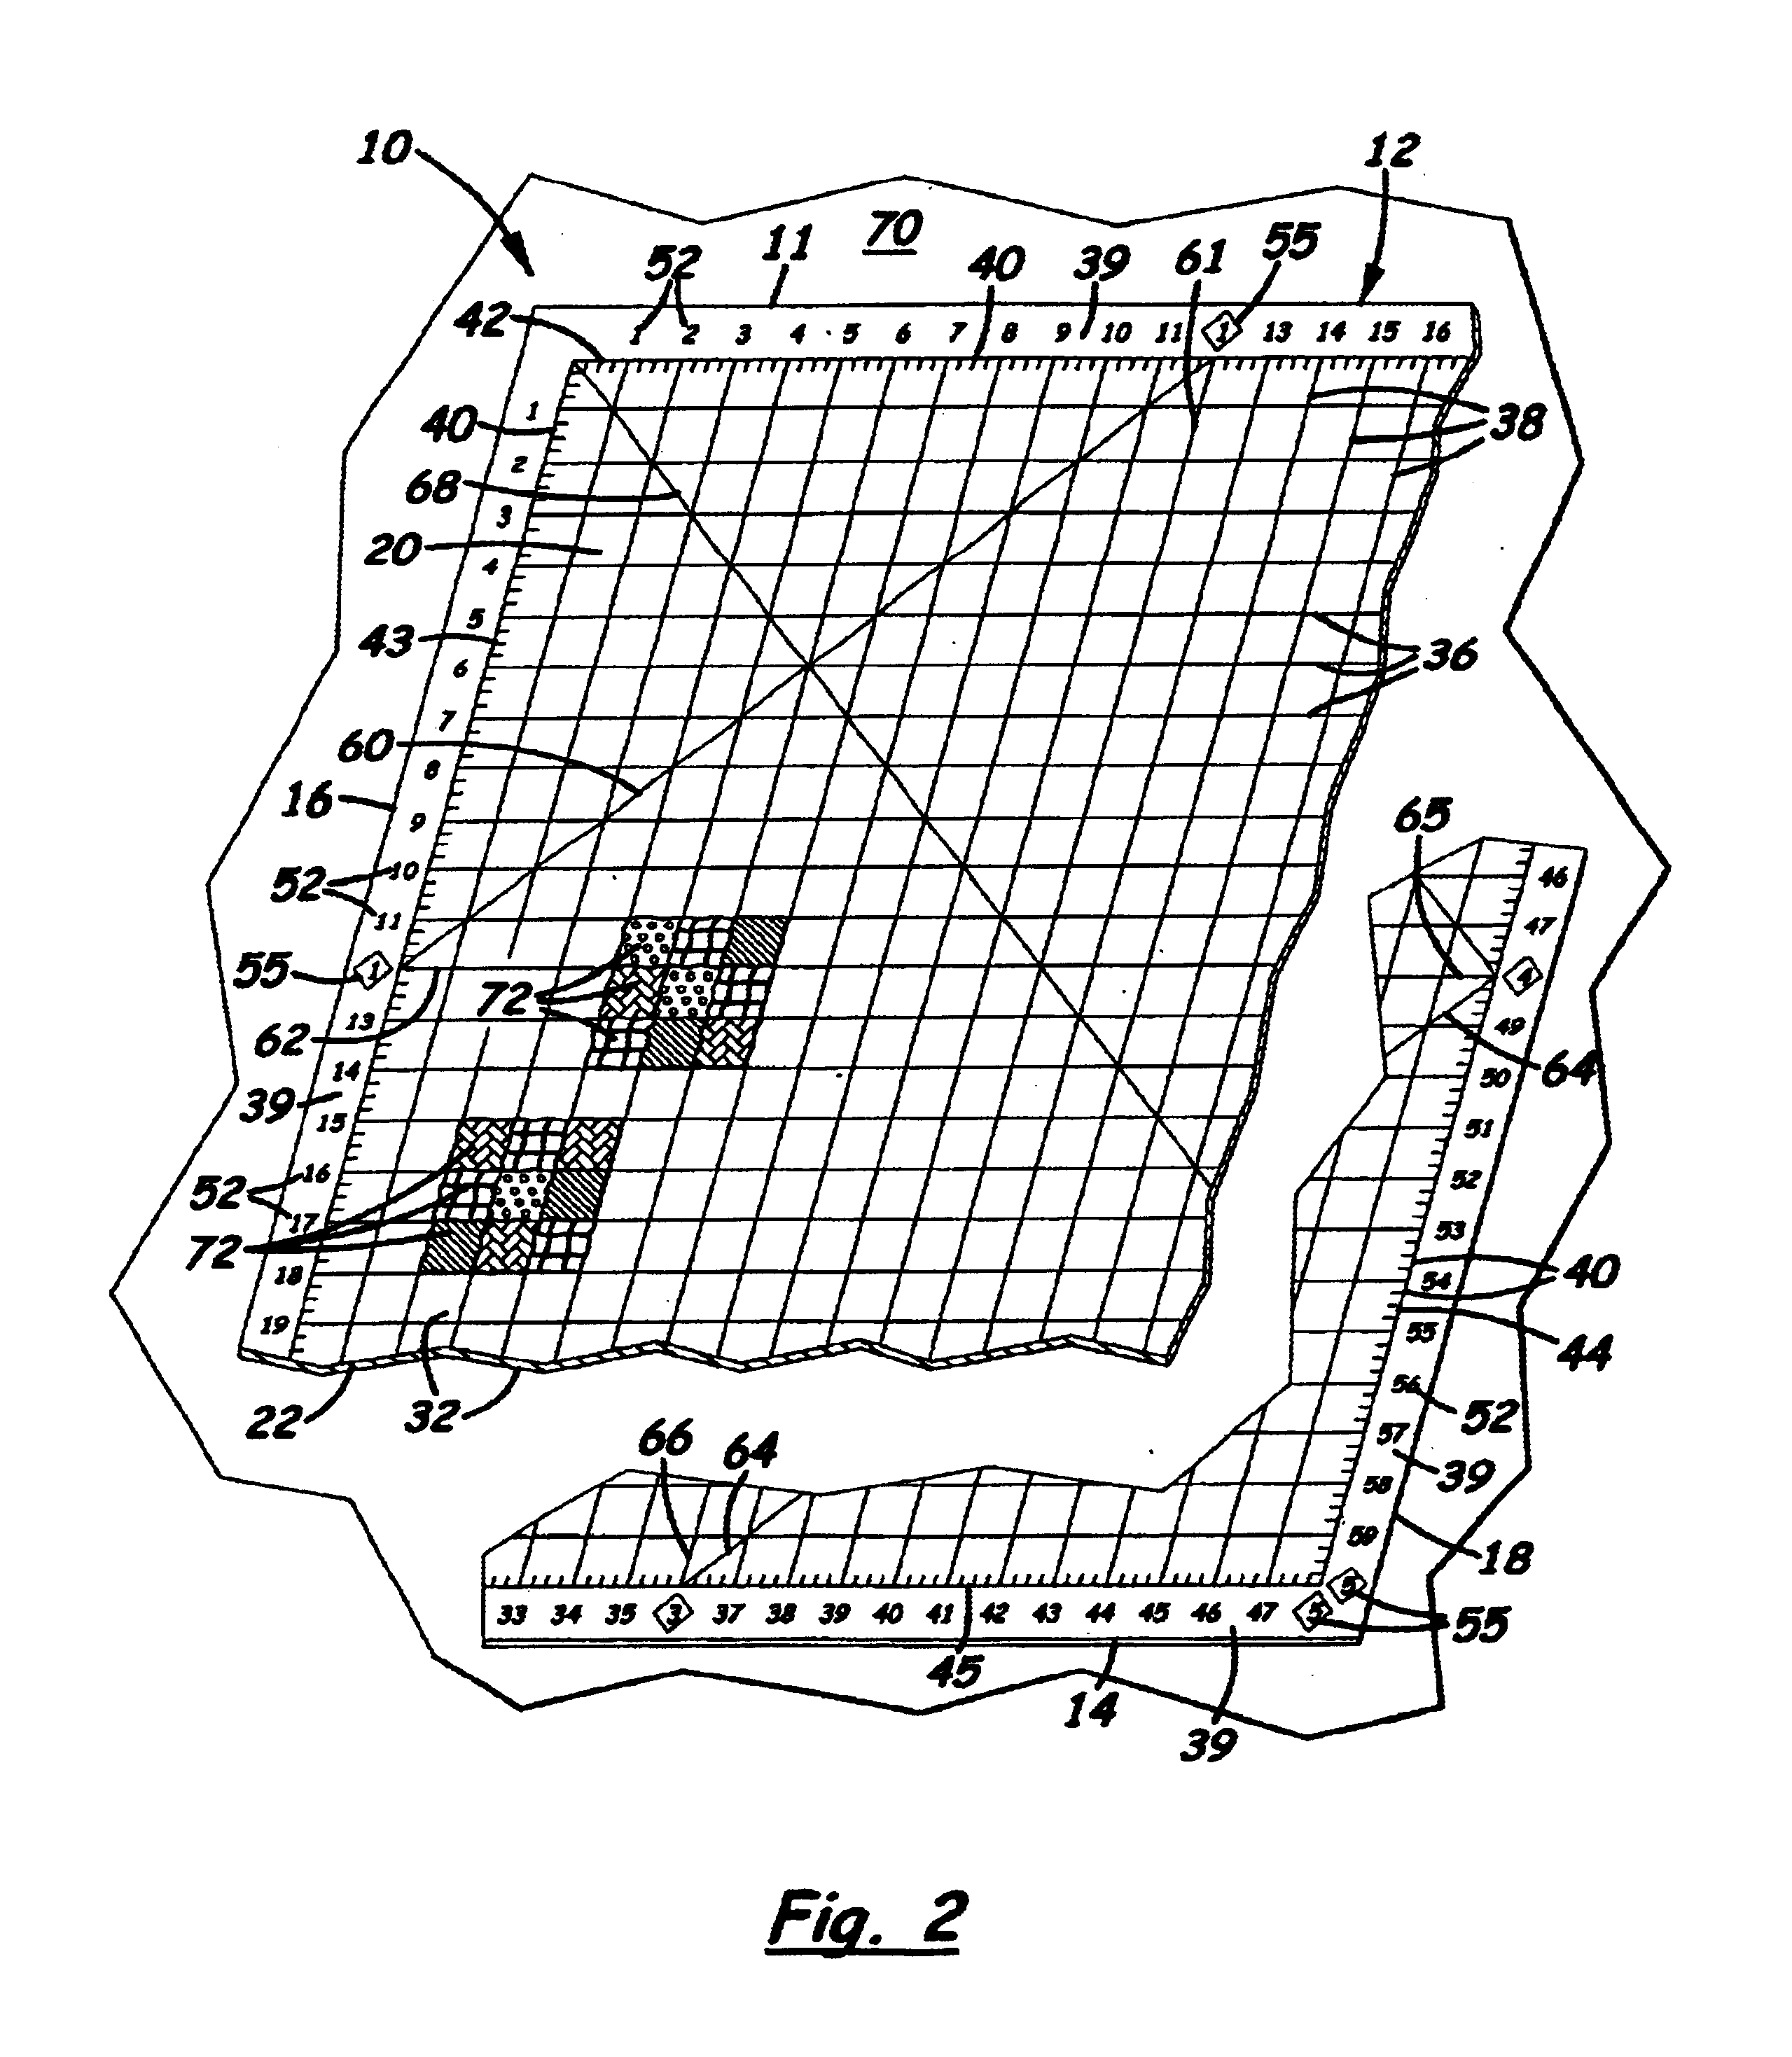 Quilt design holding device and method